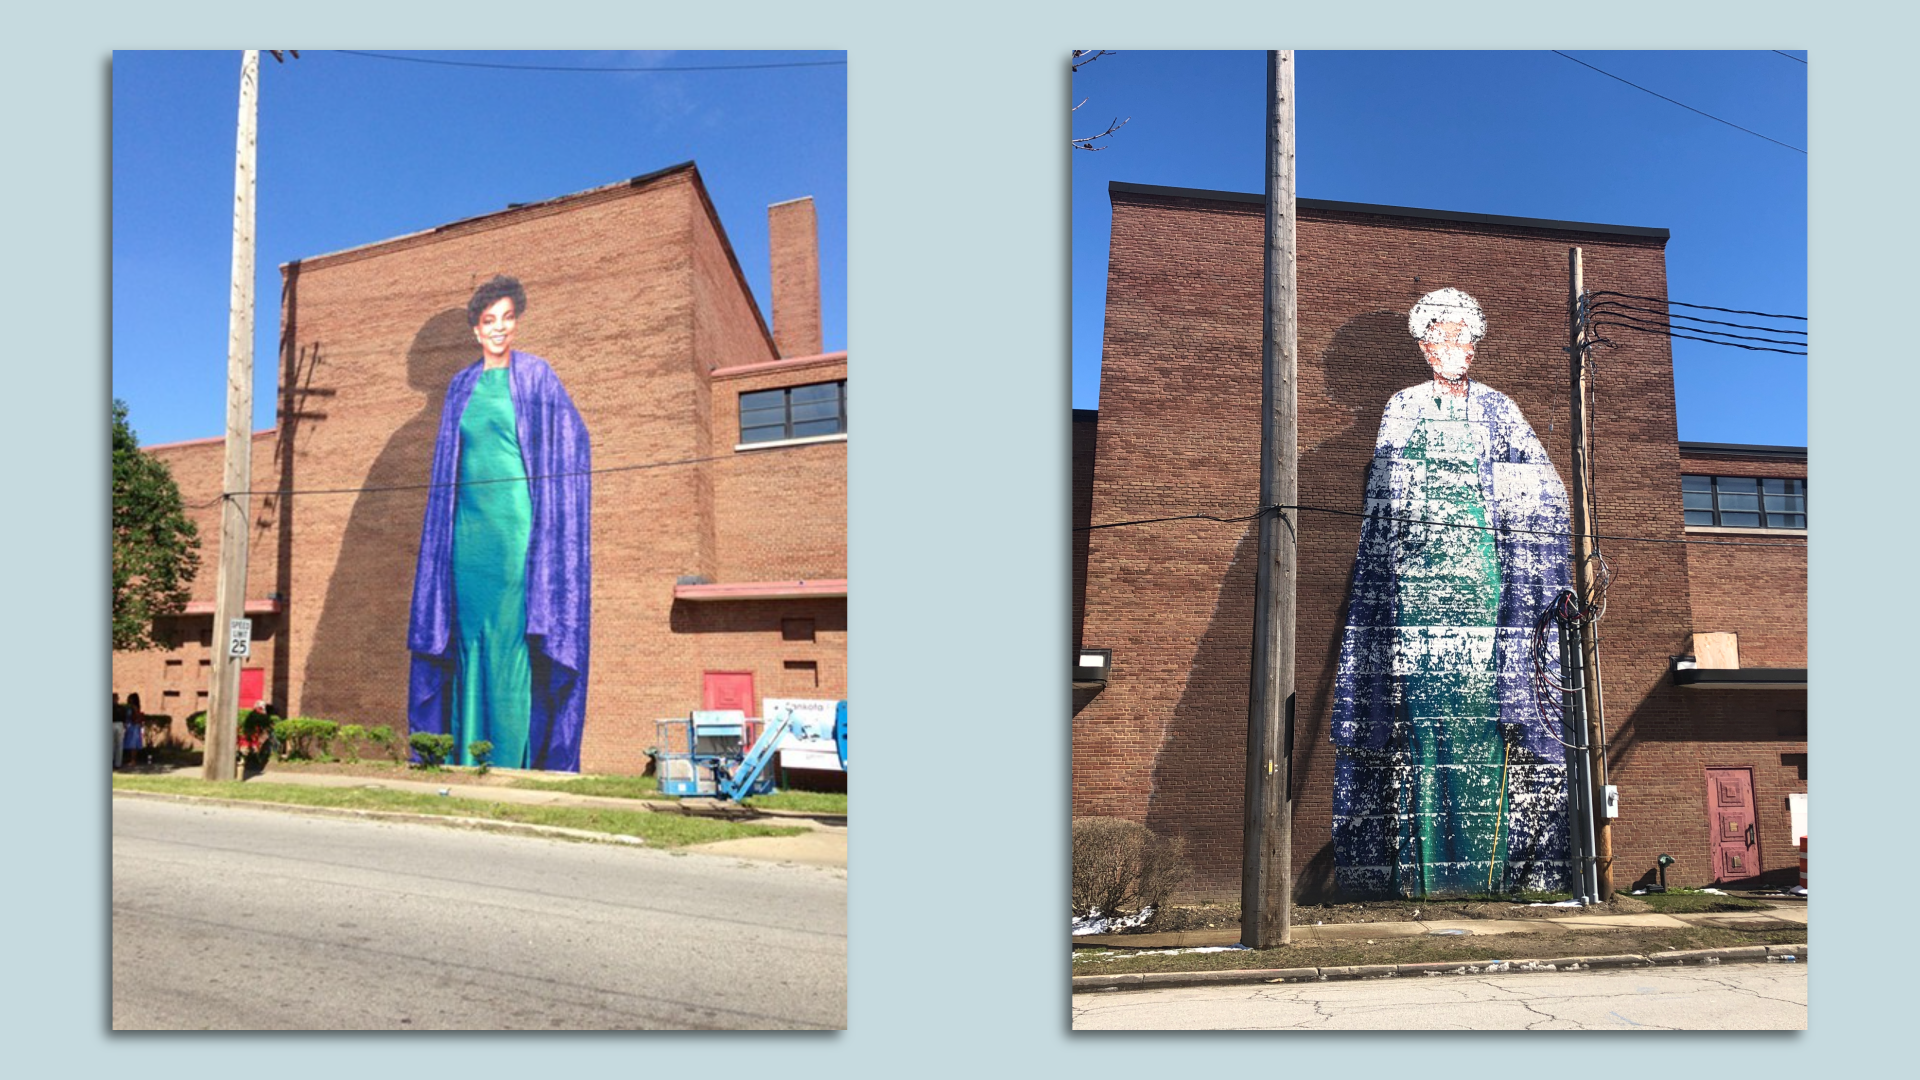 Side by side images of a 40-foot Ruby Dee mural on a brick wall in 2013 and (in much worse shape) in 2023. rent condition. Photos: provided by Karamu House (L) and Sam Allard/Axios (R)